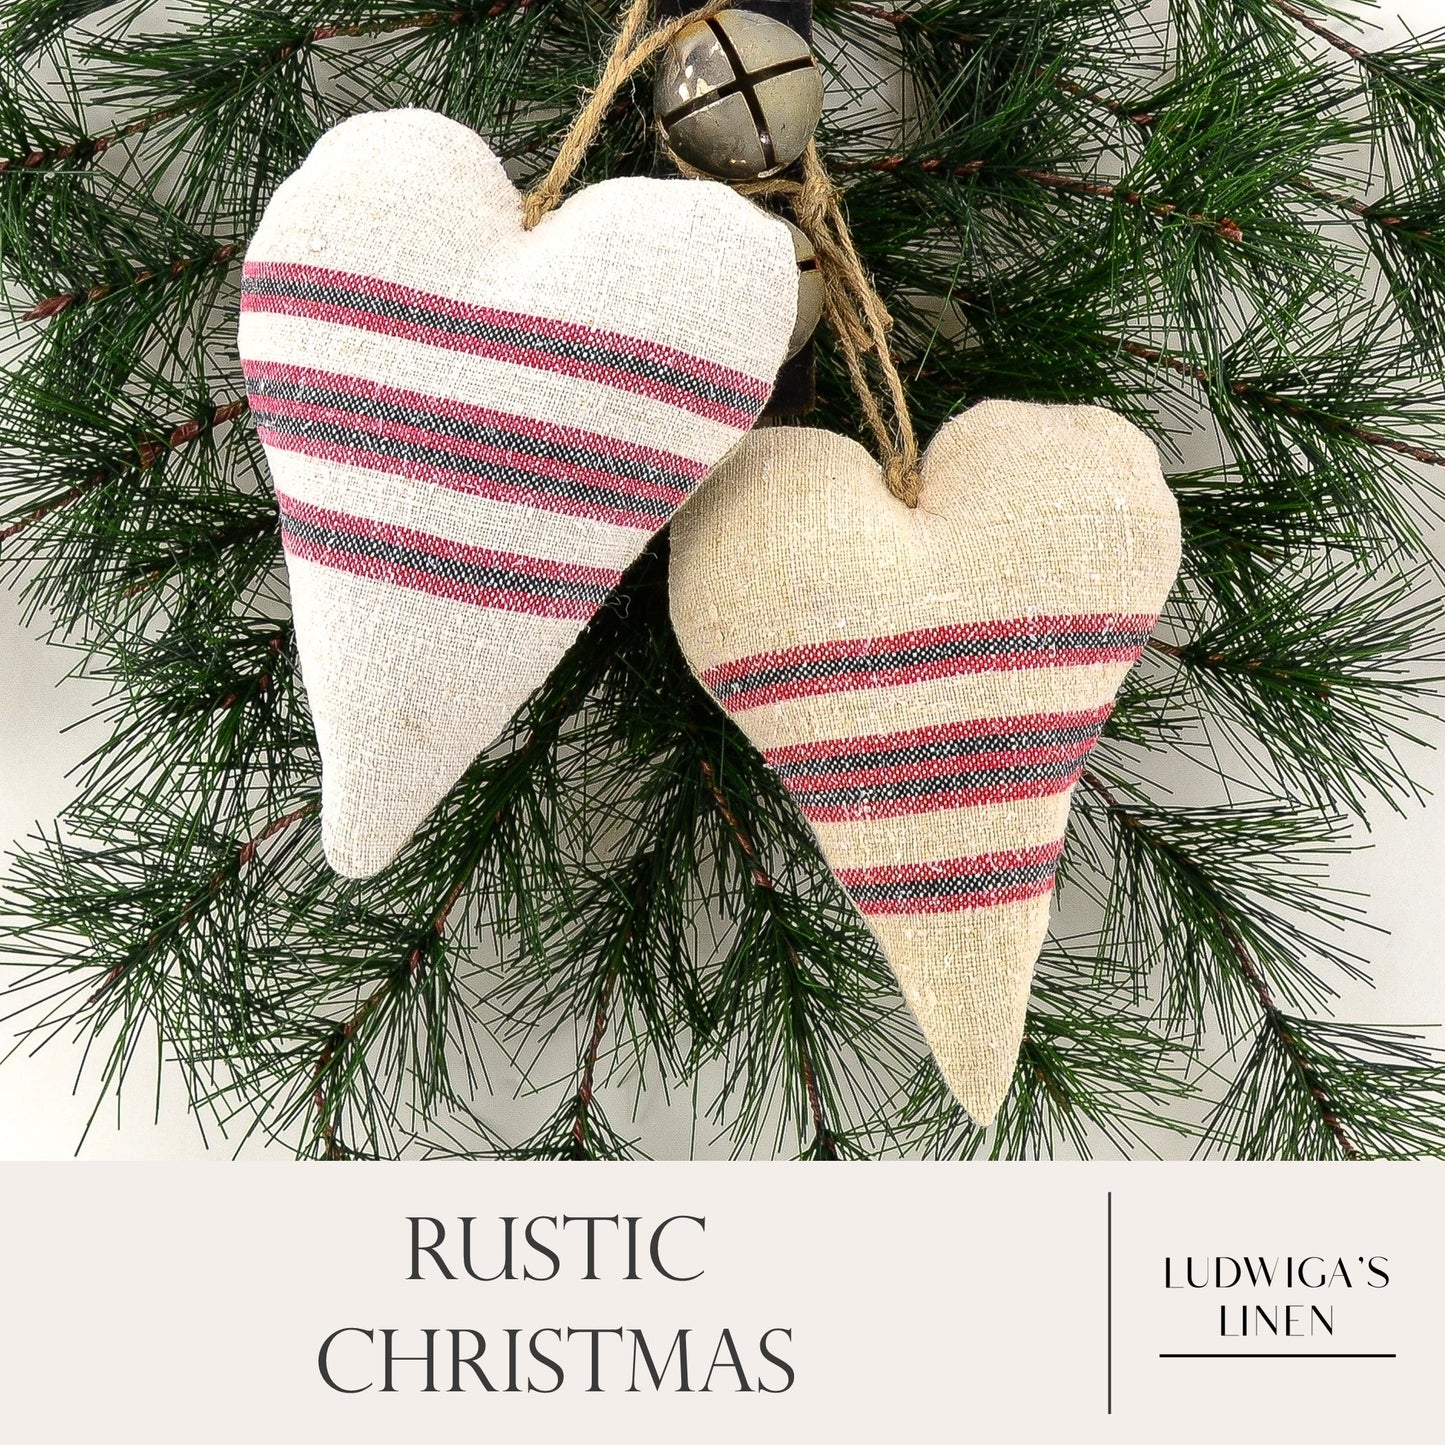 Christmas/holiday ornament - two antique European grain sack linen hearts fastened together with twine